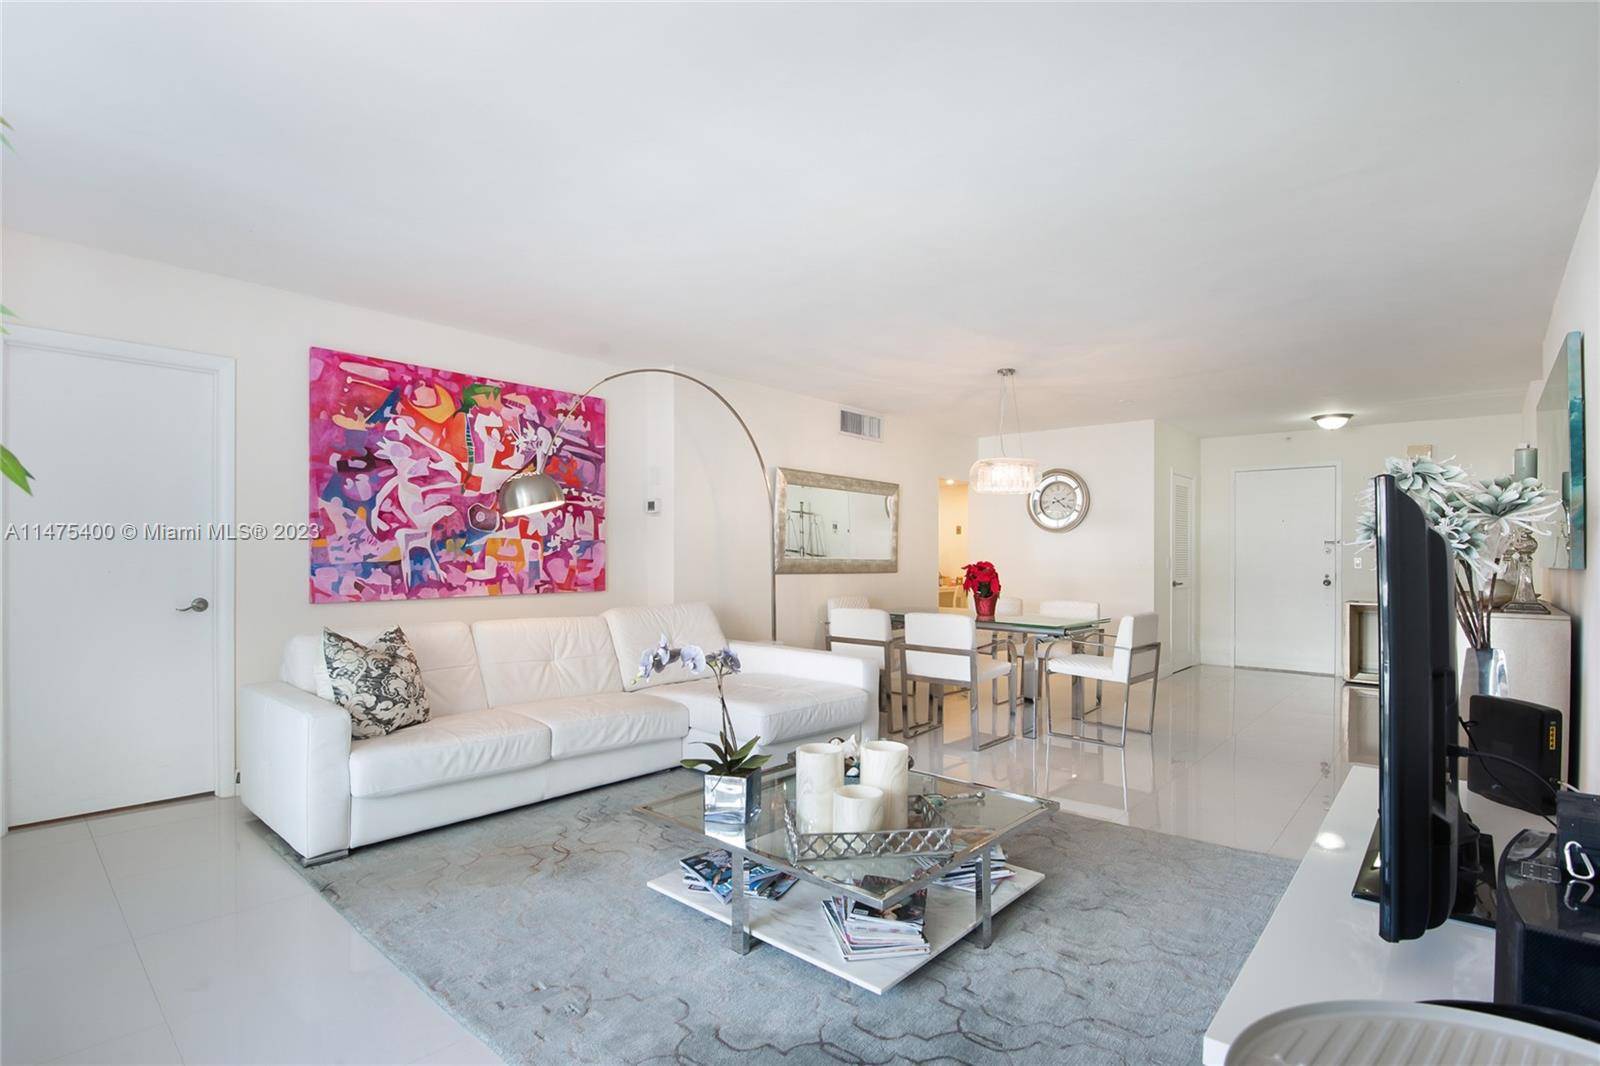 Next to The St Regis Residences, Condo Balmoral, located in the city of Bal Harbor Florida, 33154, across the street from the Bal Harbor shops, within walking distance of many ...